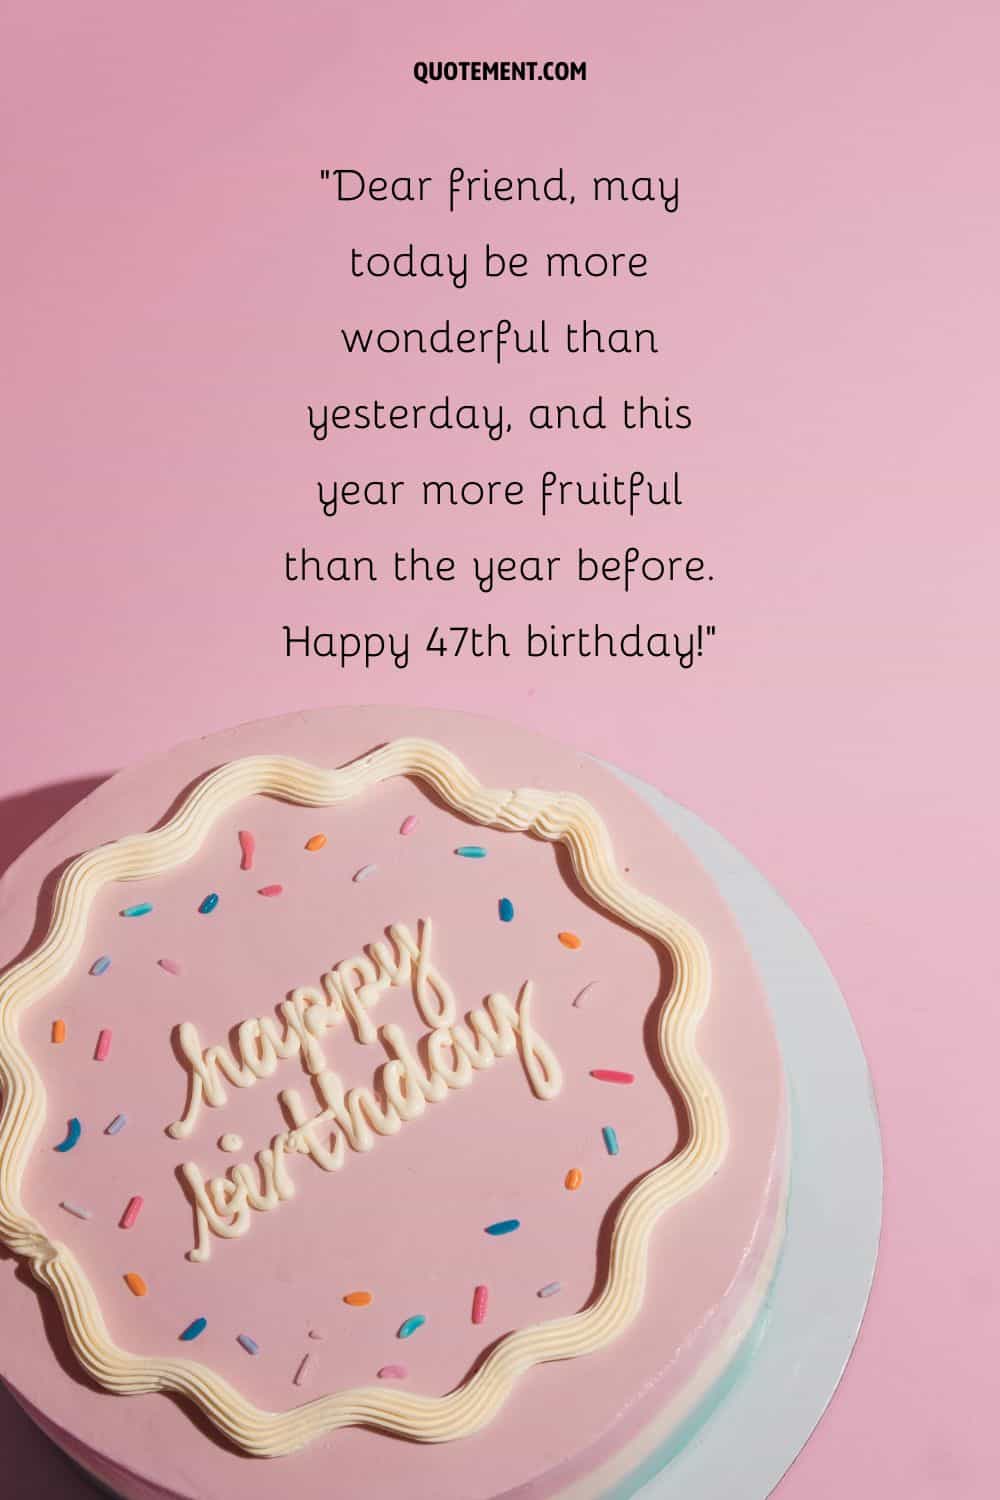 Touching message for a friend's 47th birthday and a pink birthday cake below
